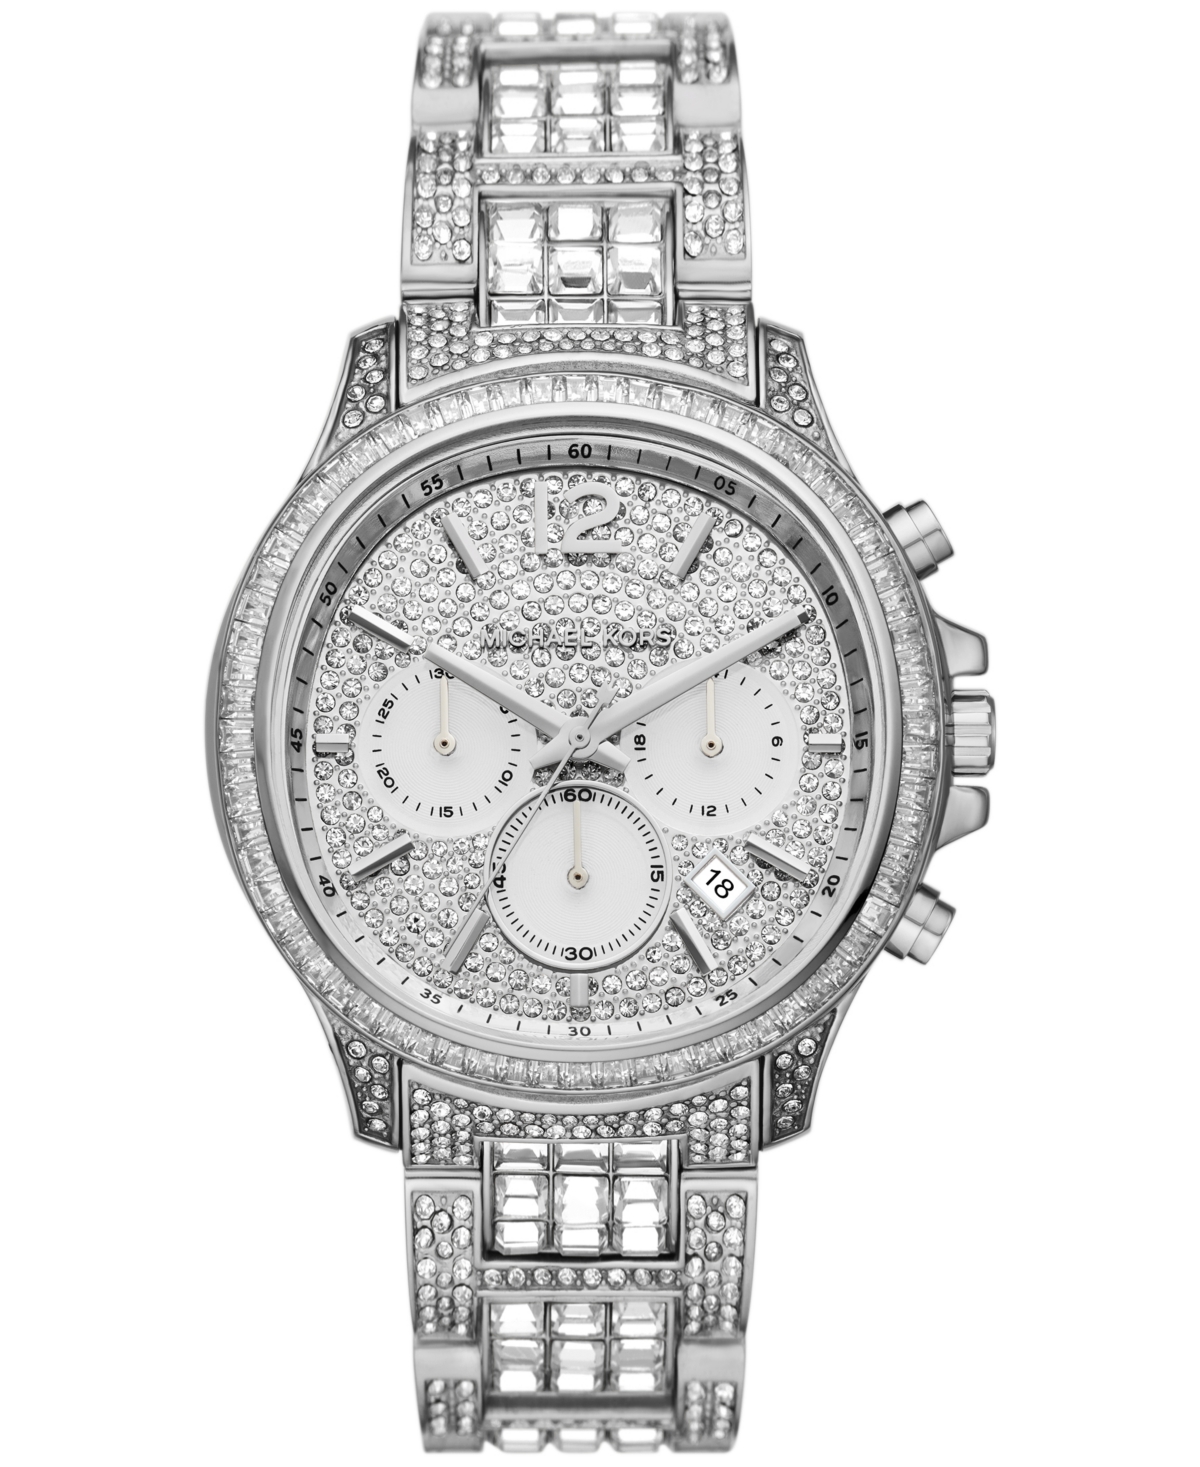 Shop Michael Kors Women's Limited Edition Sage Chronograph Silver-tone Stainless Steel Watch 42mm